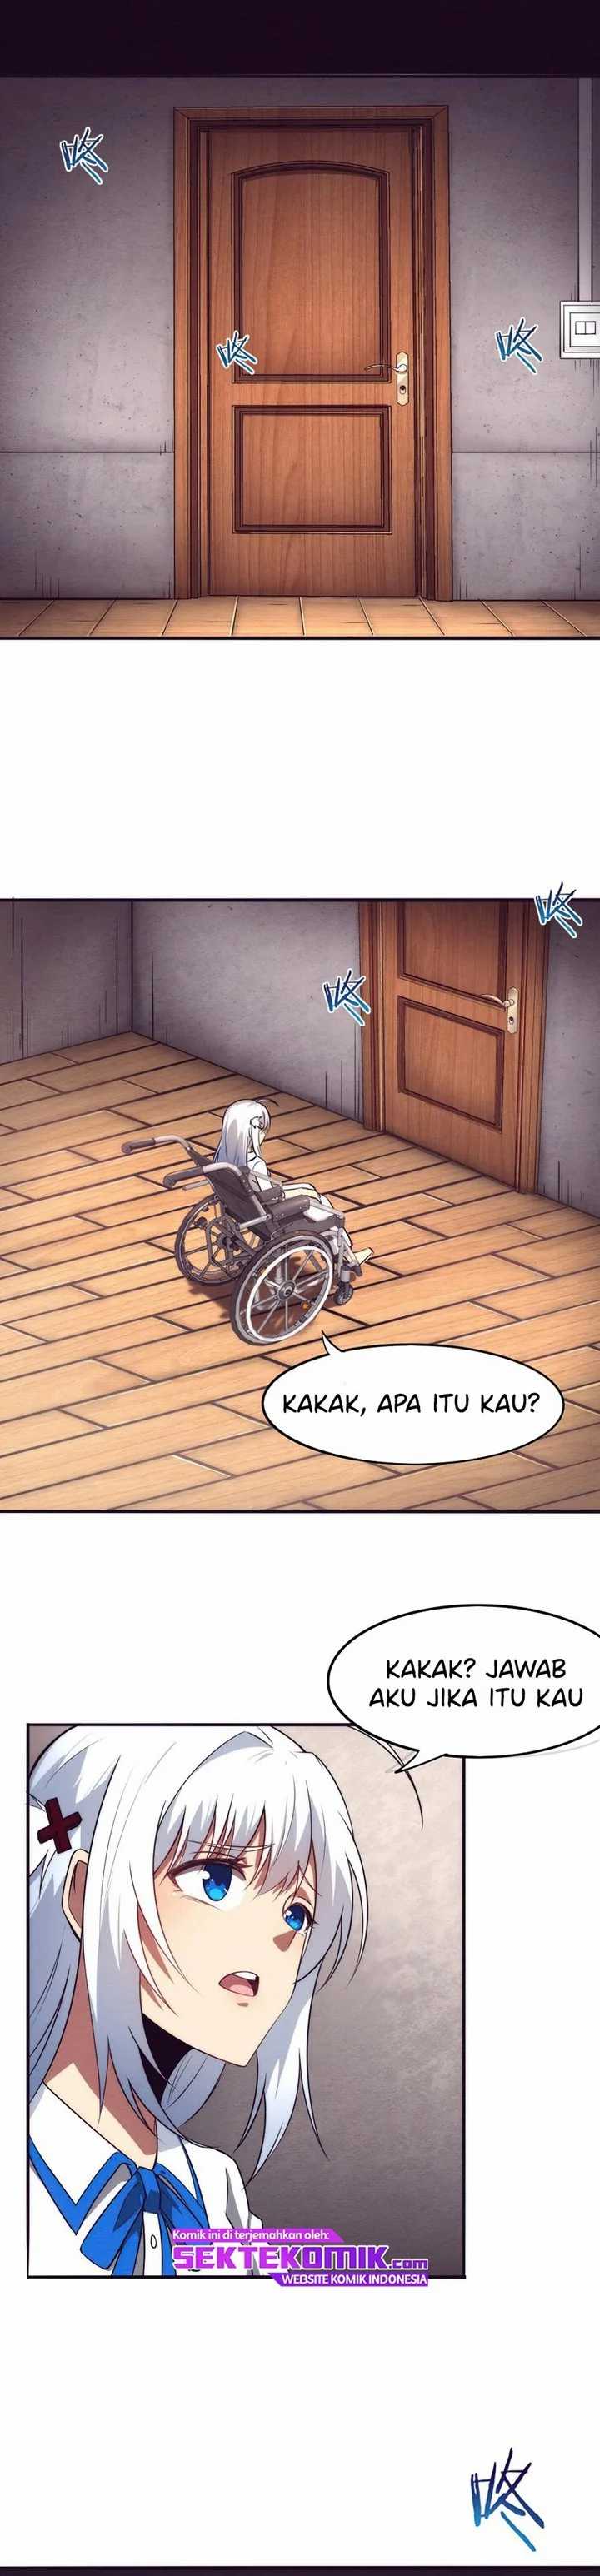 Evolution frenzy Chapter 05 bahasa indoensia